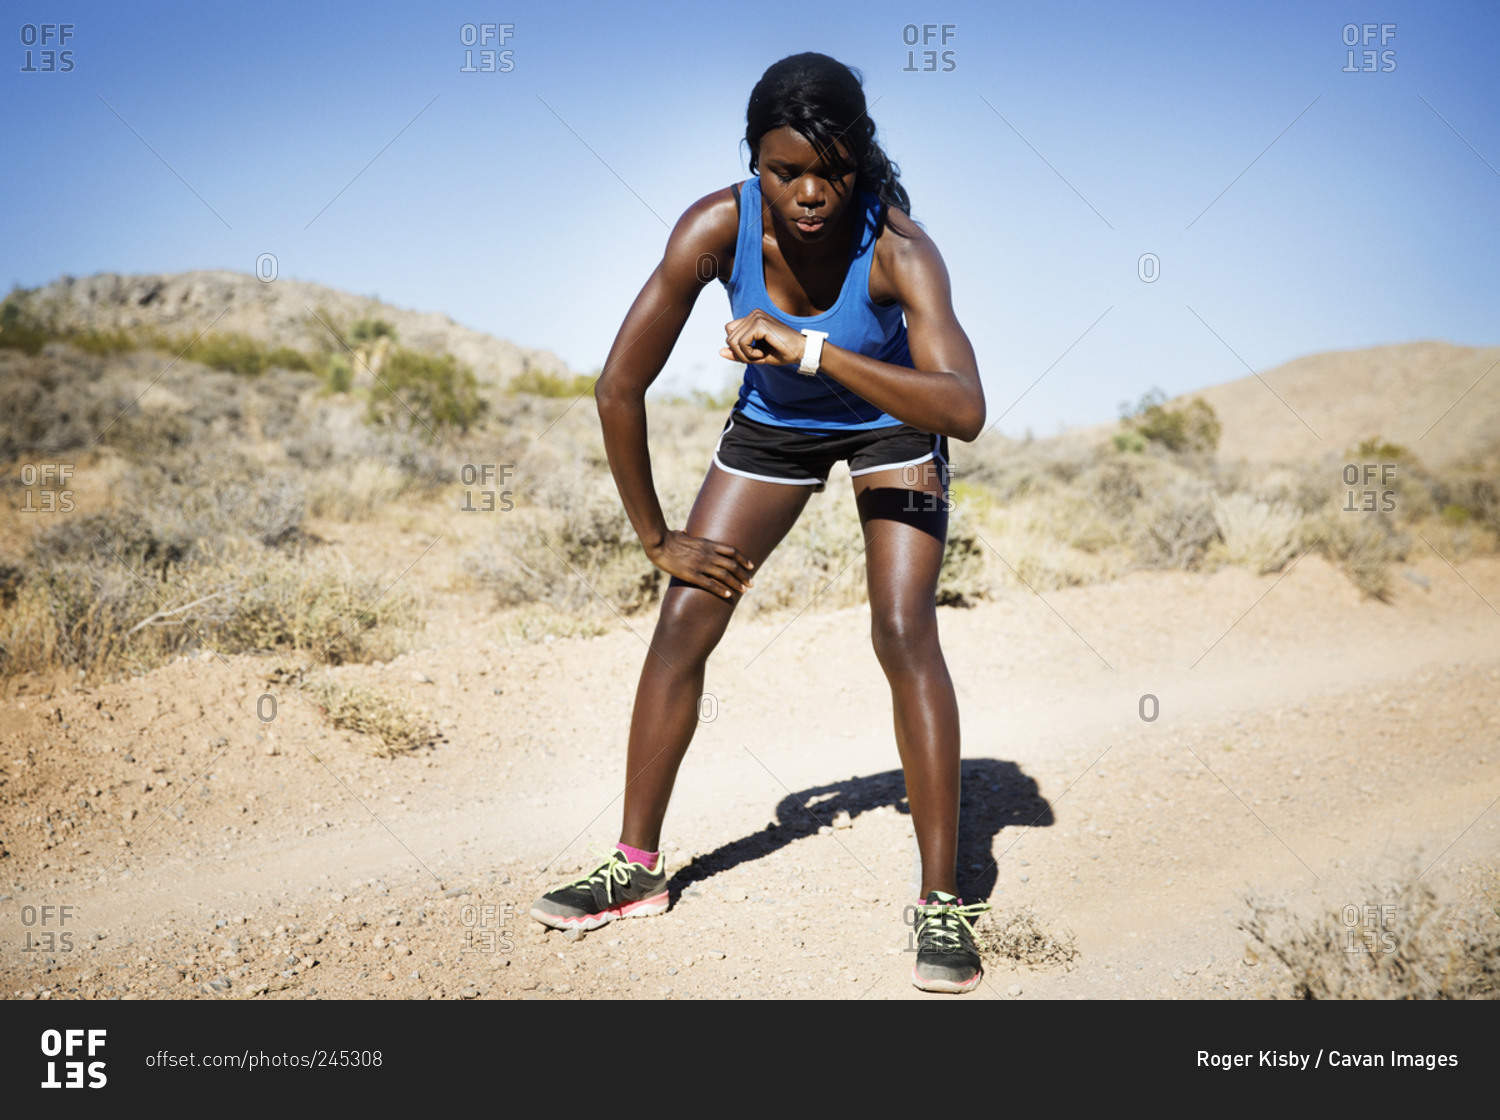 Athletic woman in remote setting checking watch